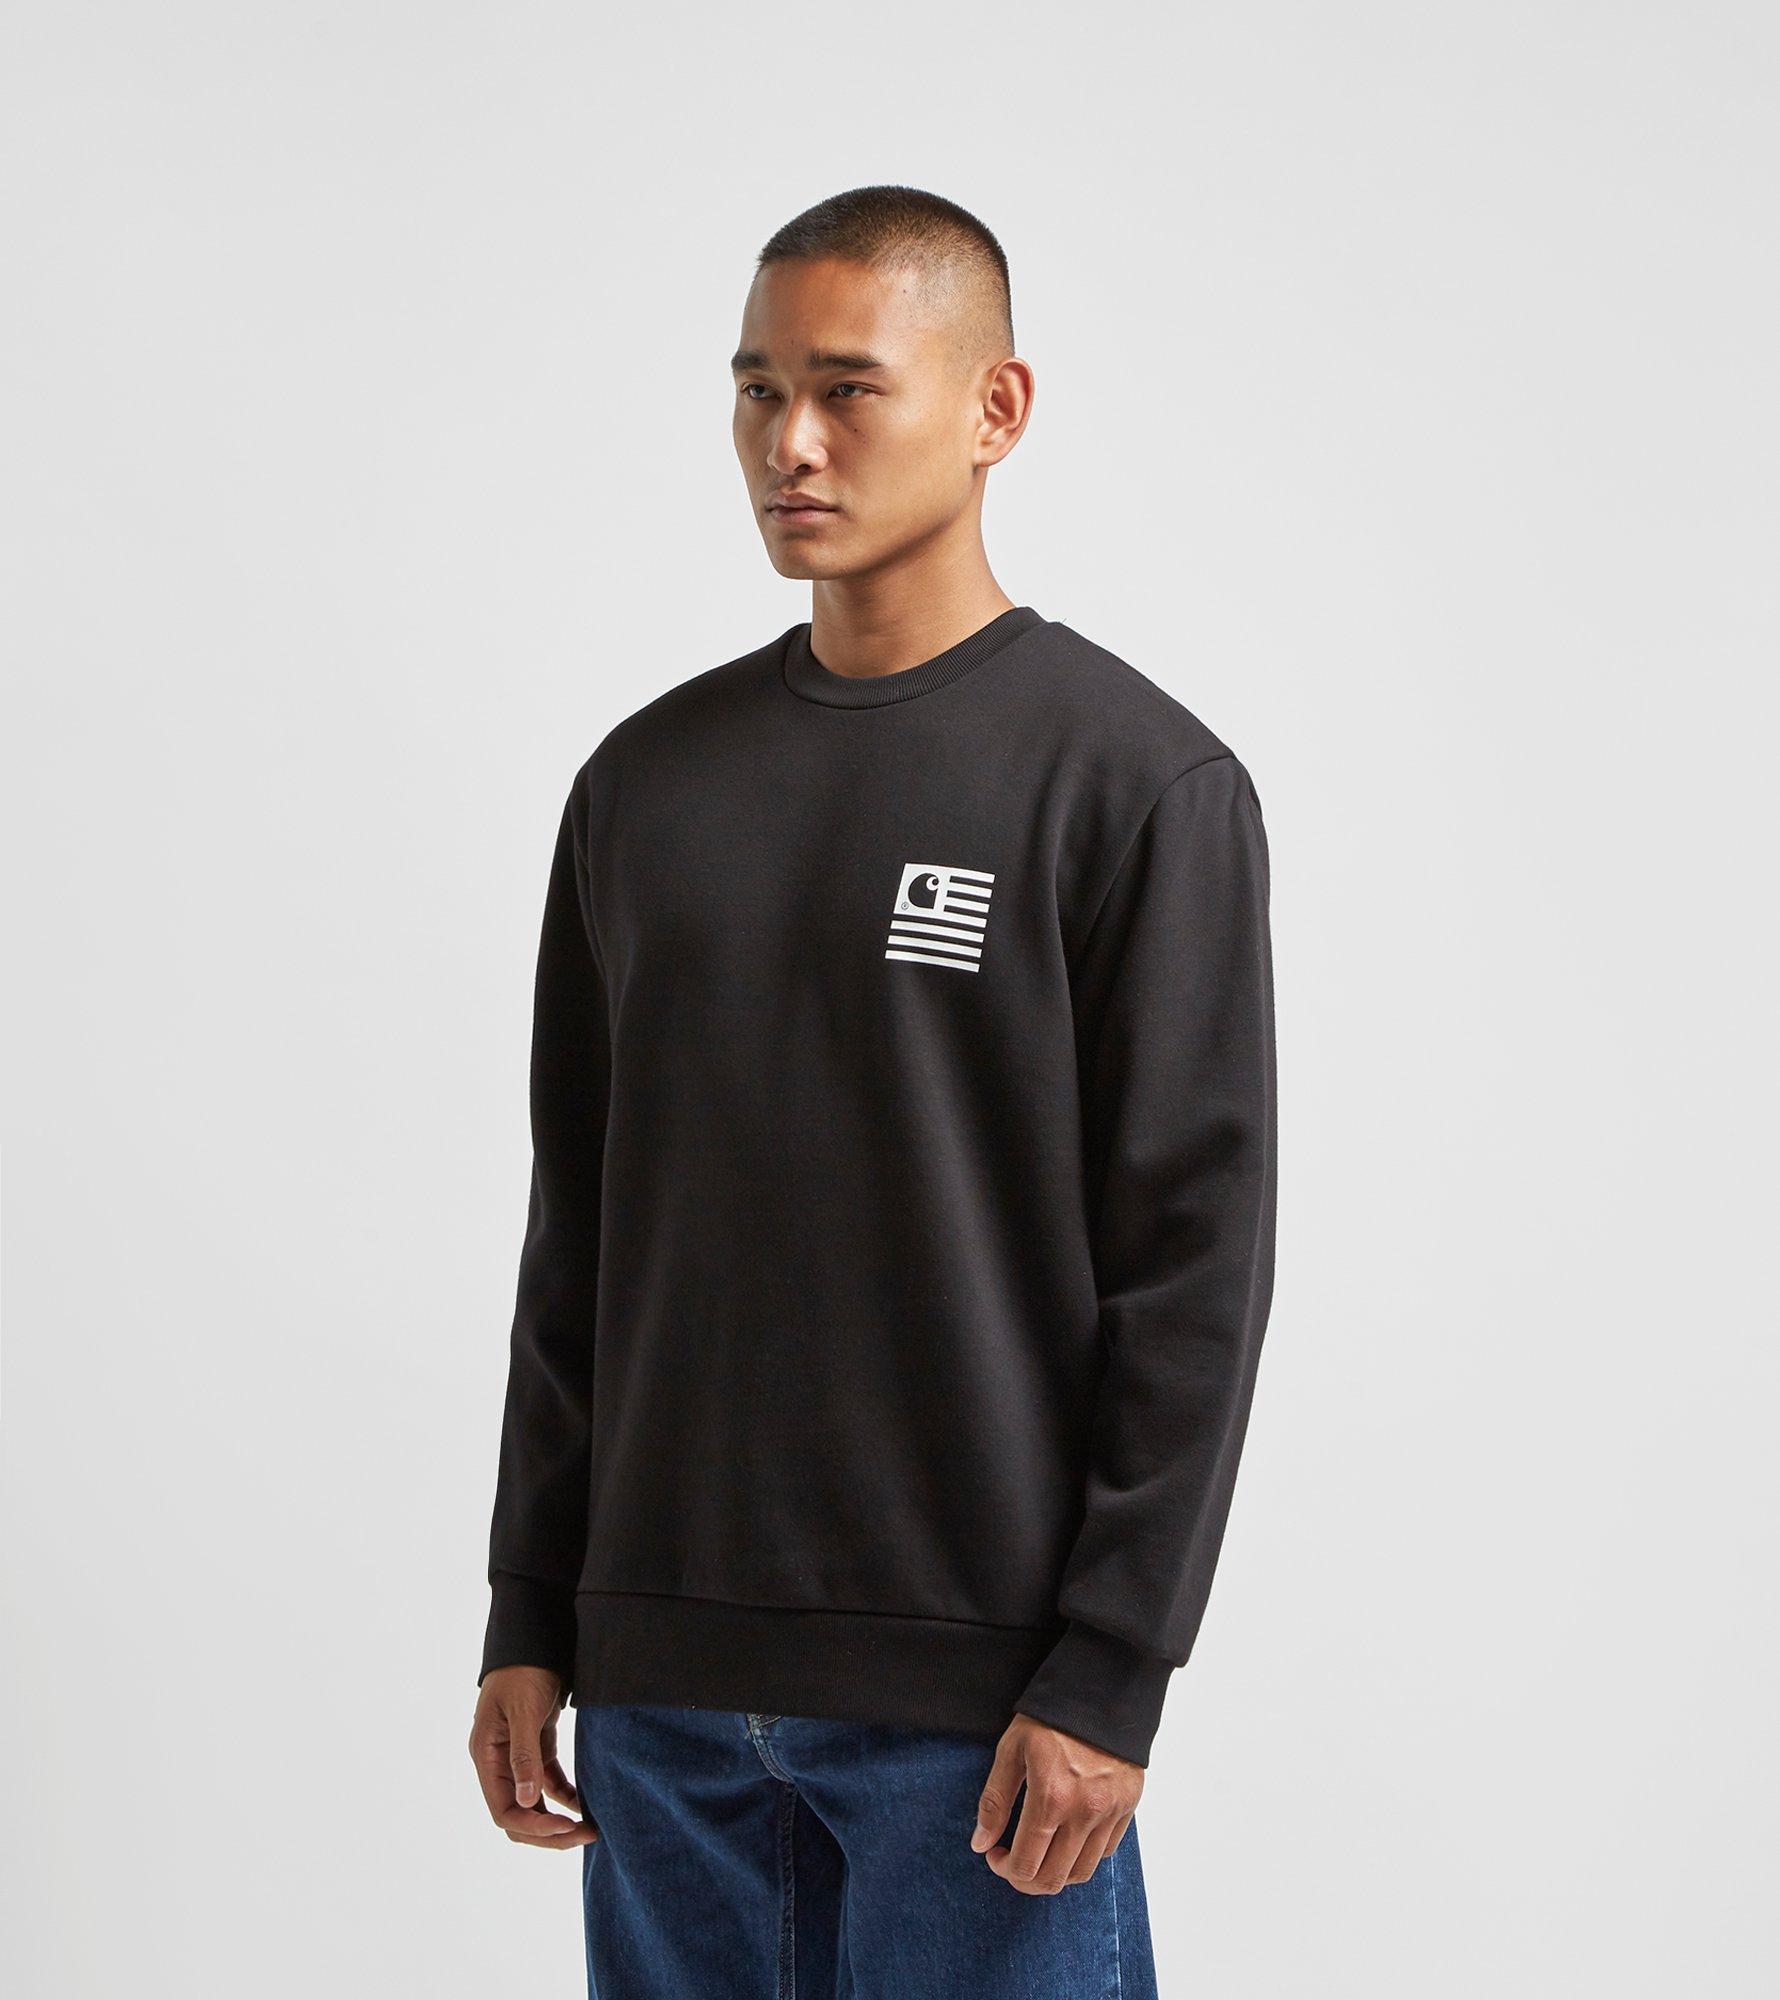 Carhartt WIP Cotton Incognito Sweatshirt in Black for Men - Lyst